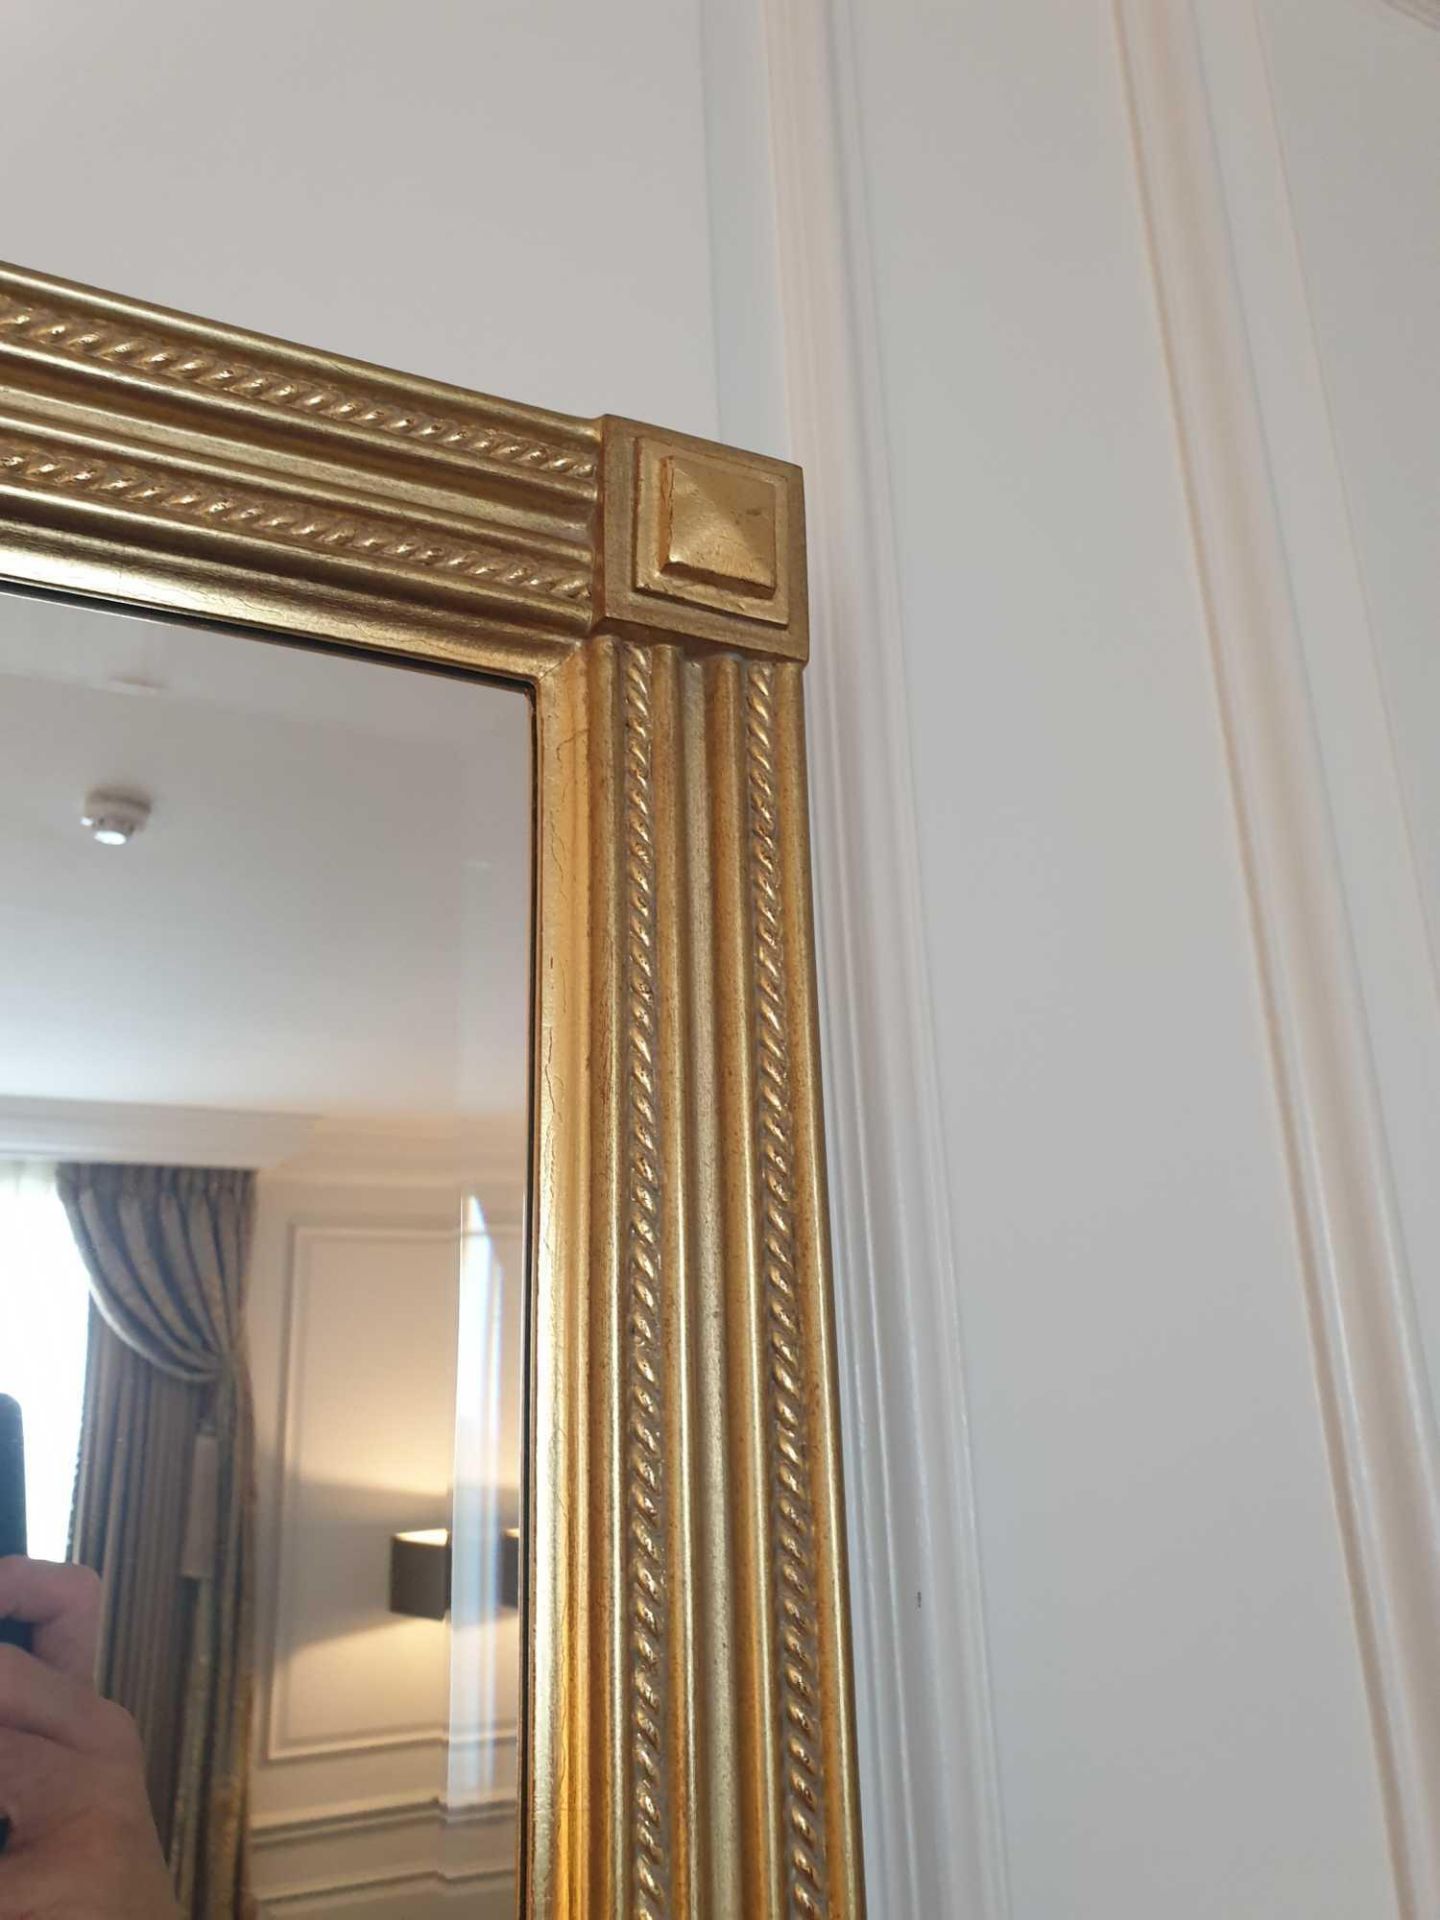 Rectangular Bevelled Empire Mirror With Gold Painted Wood Frame 840mm x 1060mm (Room 702 & 703) - Image 2 of 2